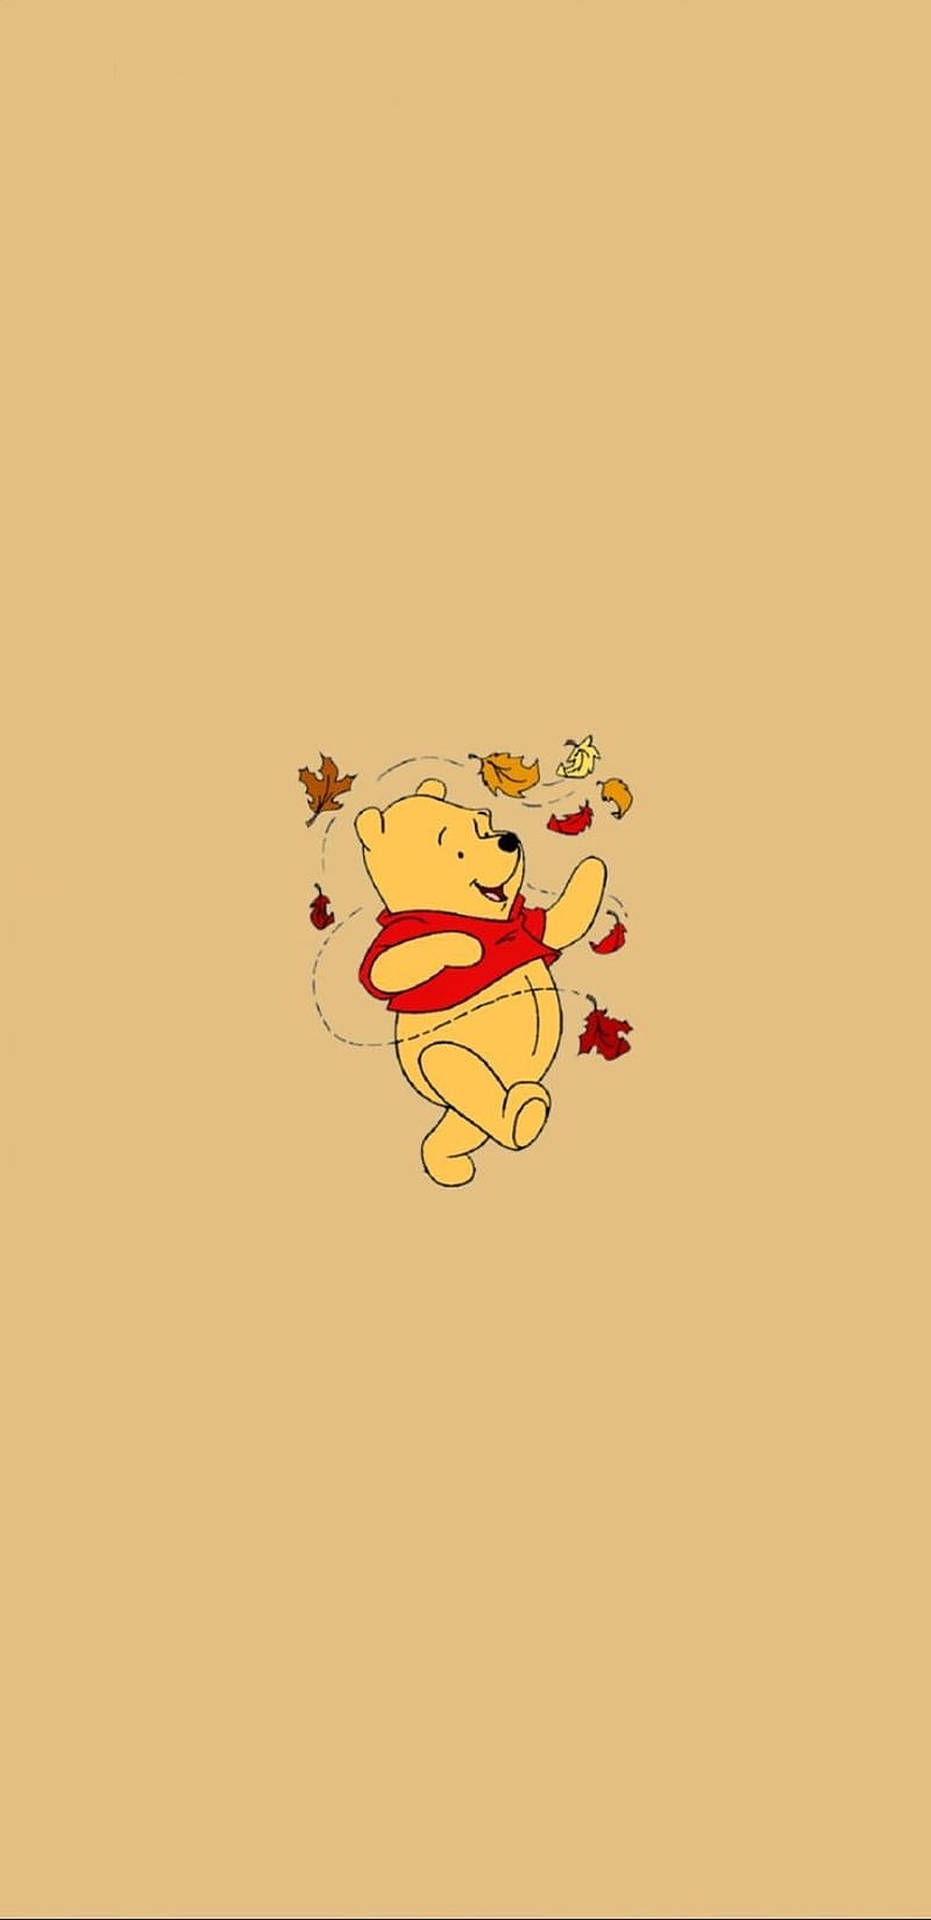 Winnie The Pooh With Leaves